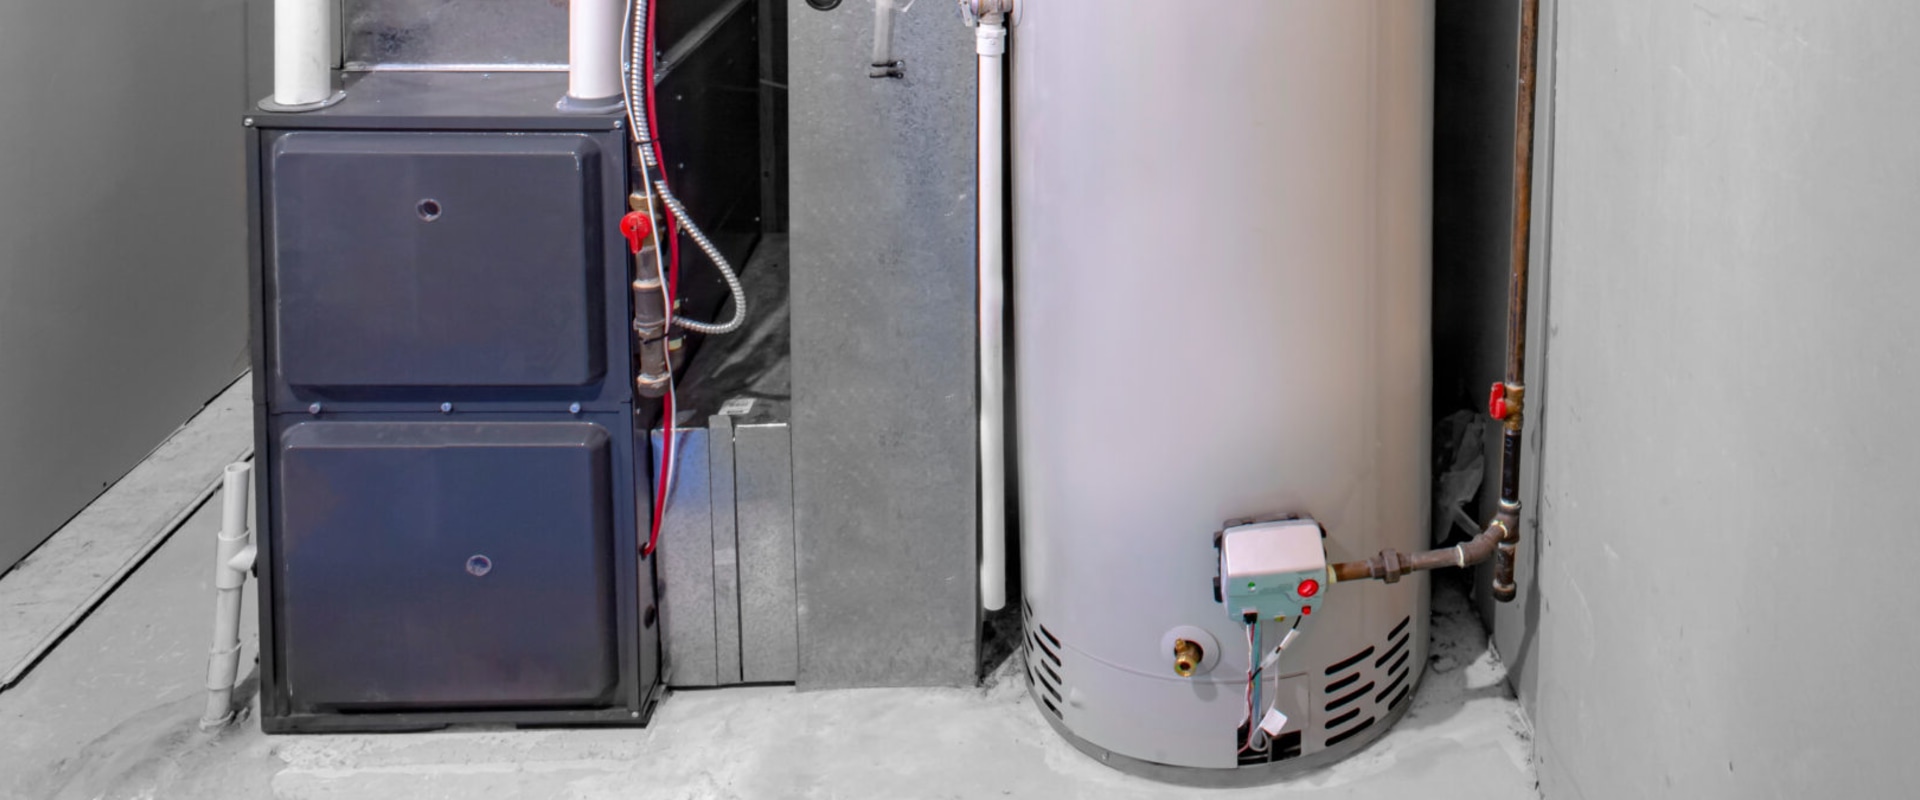 The Cost of Water Heater Replacement: Why is it So Expensive?